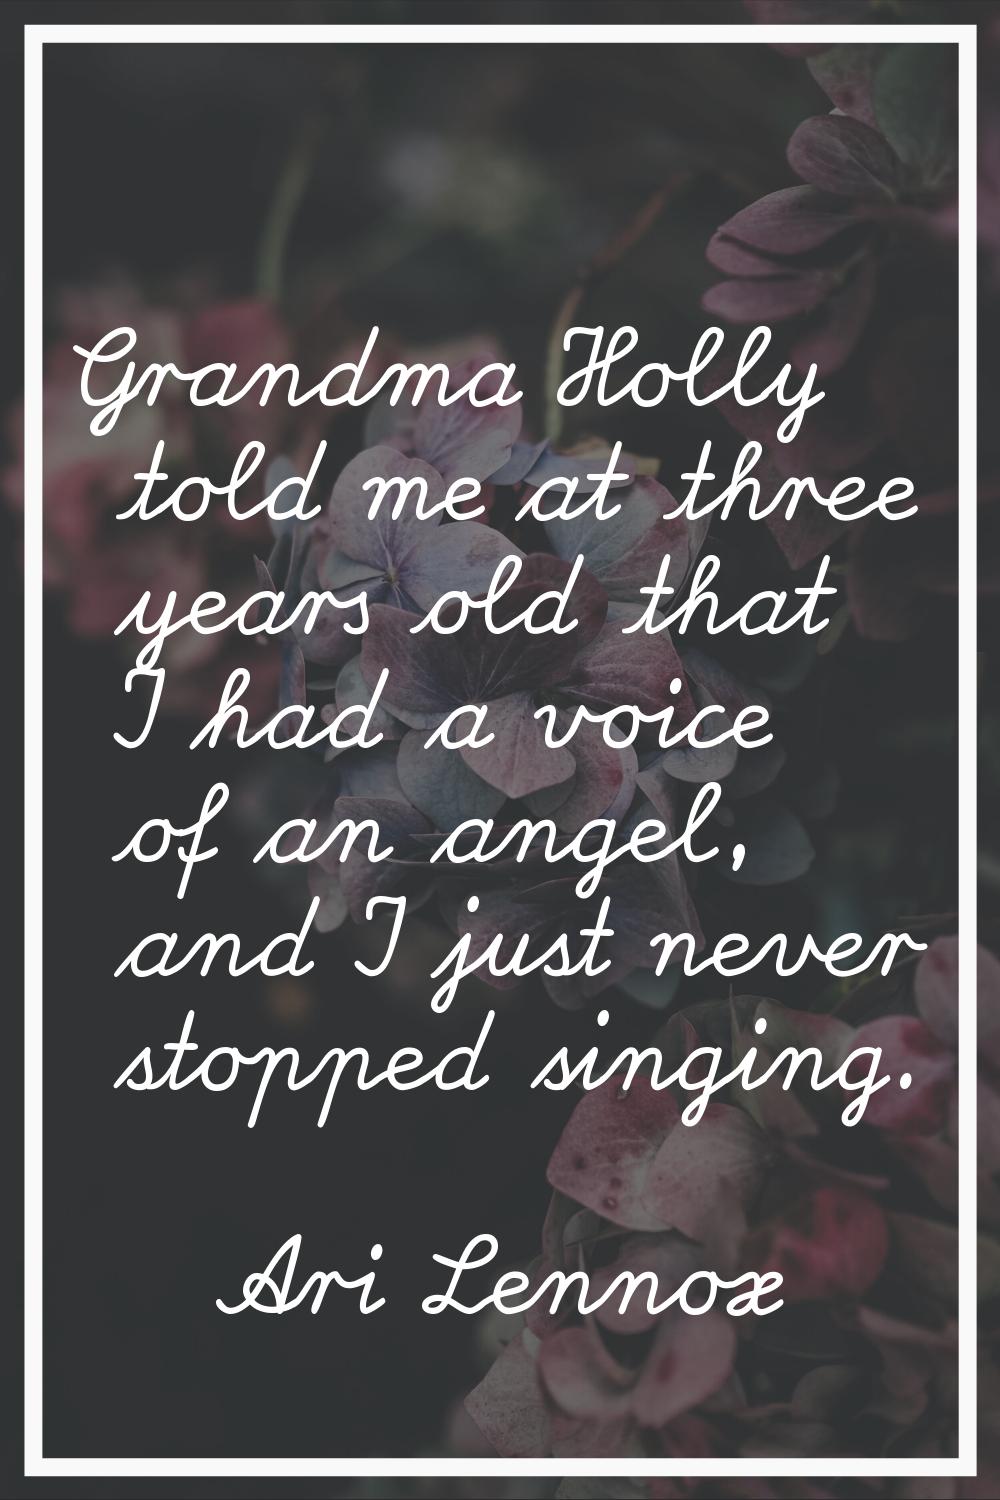 Grandma Holly told me at three years old that I had a voice of an angel, and I just never stopped s